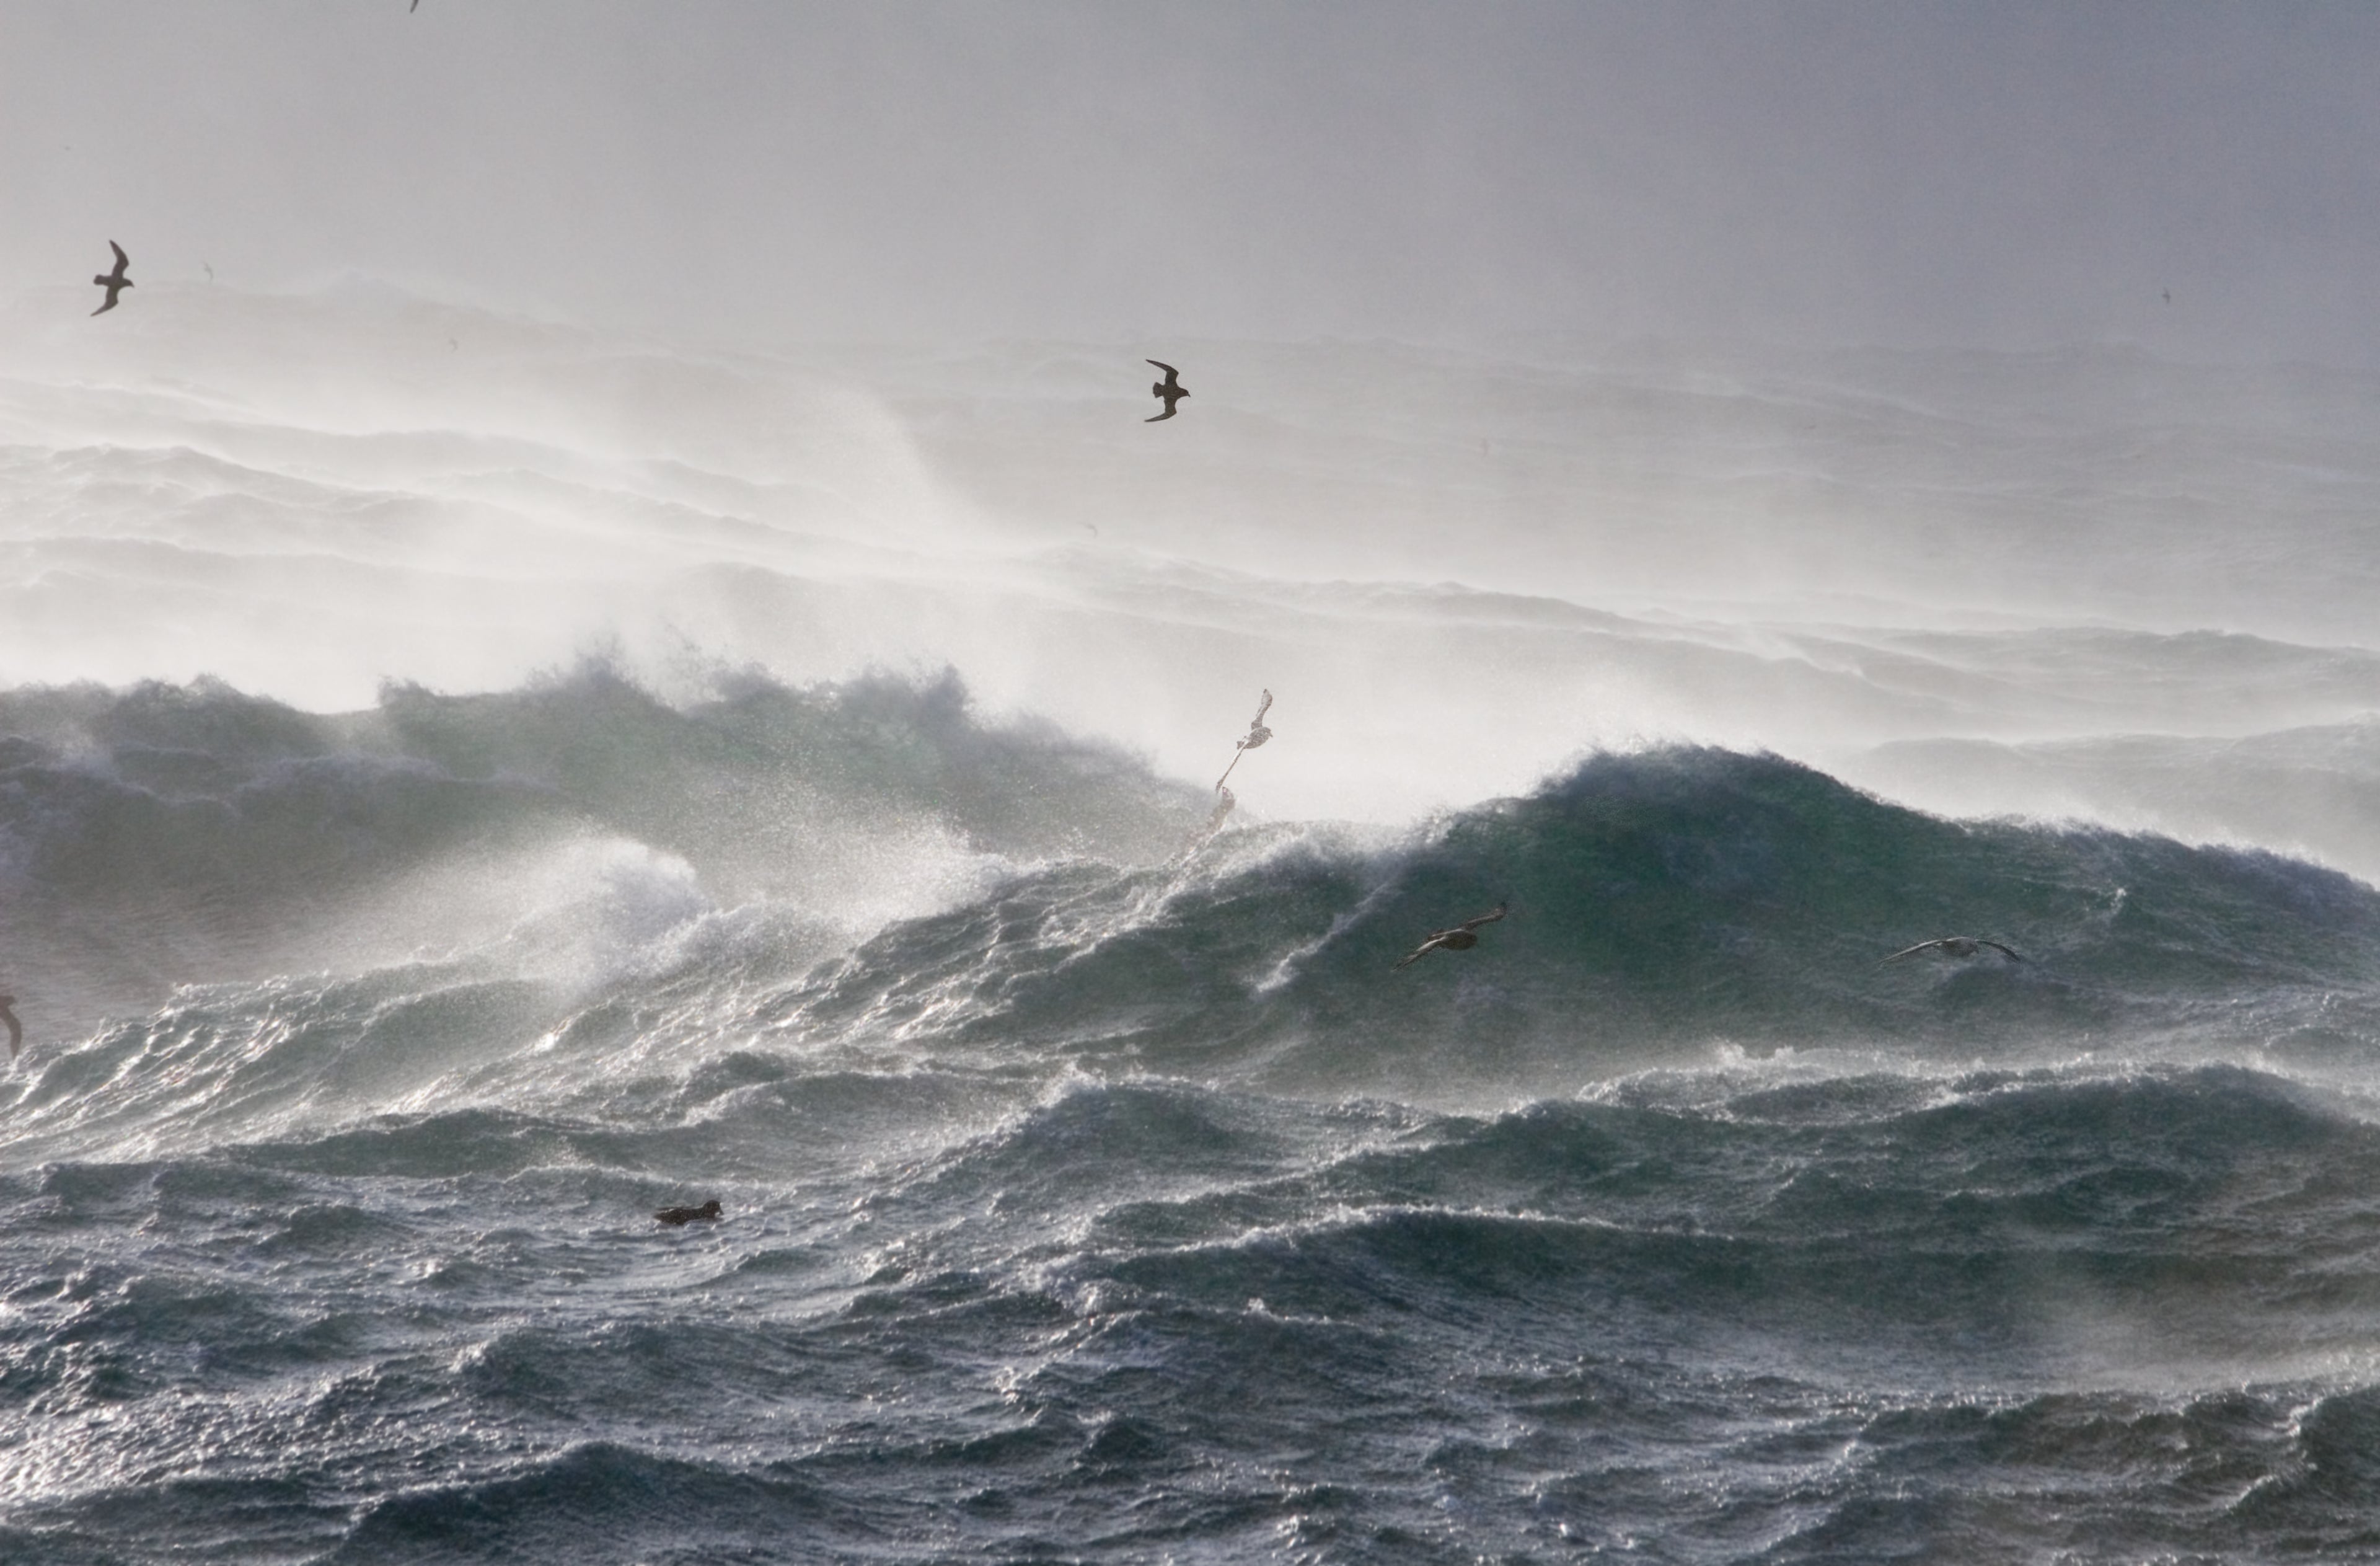 Large waves, windswept, with seagulls flying in the foreground. 